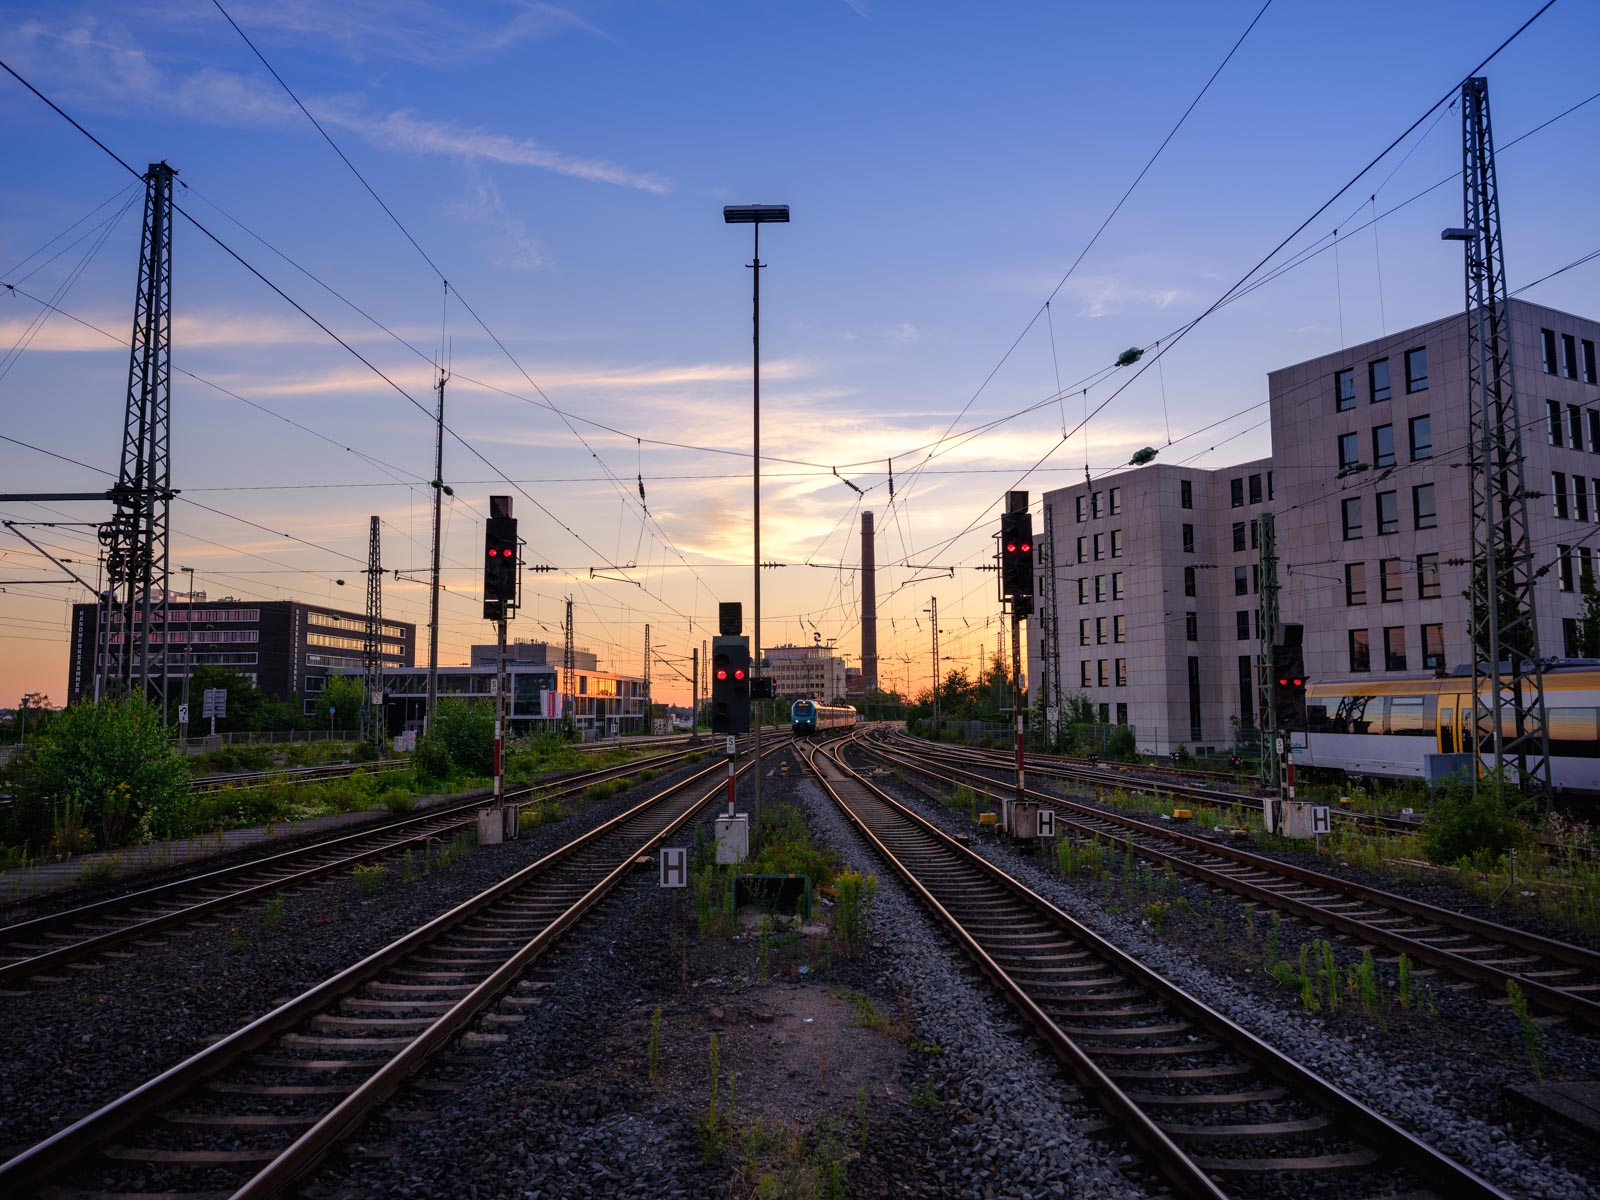 Railway romance at Bielefeld main station on 1 August 2020 in the morning at 6 am (Bielefeld, Germany).